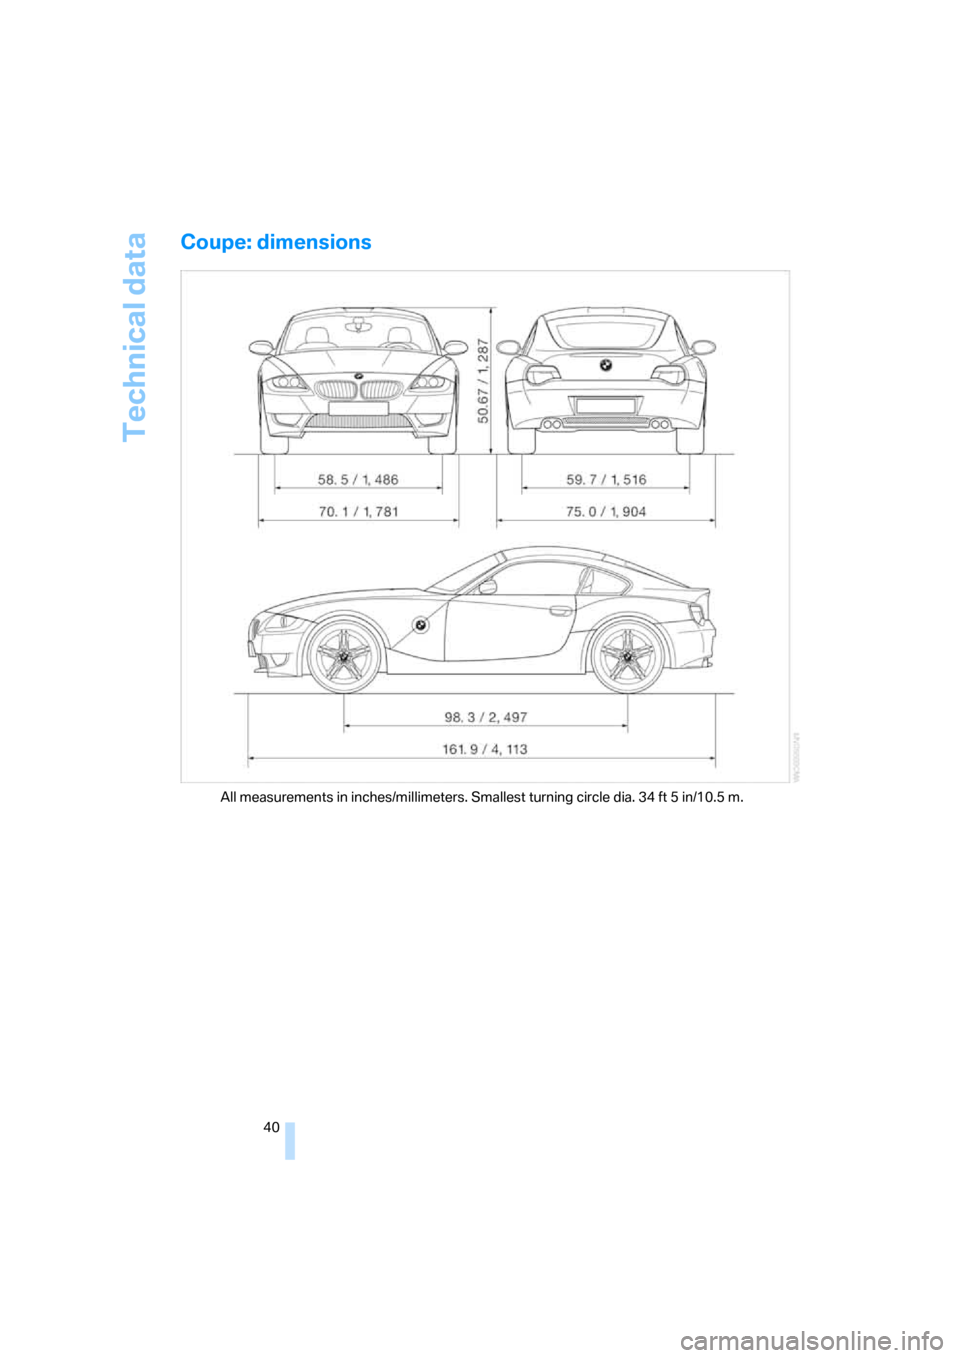 BMW Z4M COUPE 2007 E86 Service Manual Technical data
40
Coupe: dimensions
All measurements in inches/millimeters. Smallest turning circle dia. 34 ft 5 in/10.5 m.
ba5.book  Seite 40  Mittwoch, 28. Februar 2007  1:09 13 